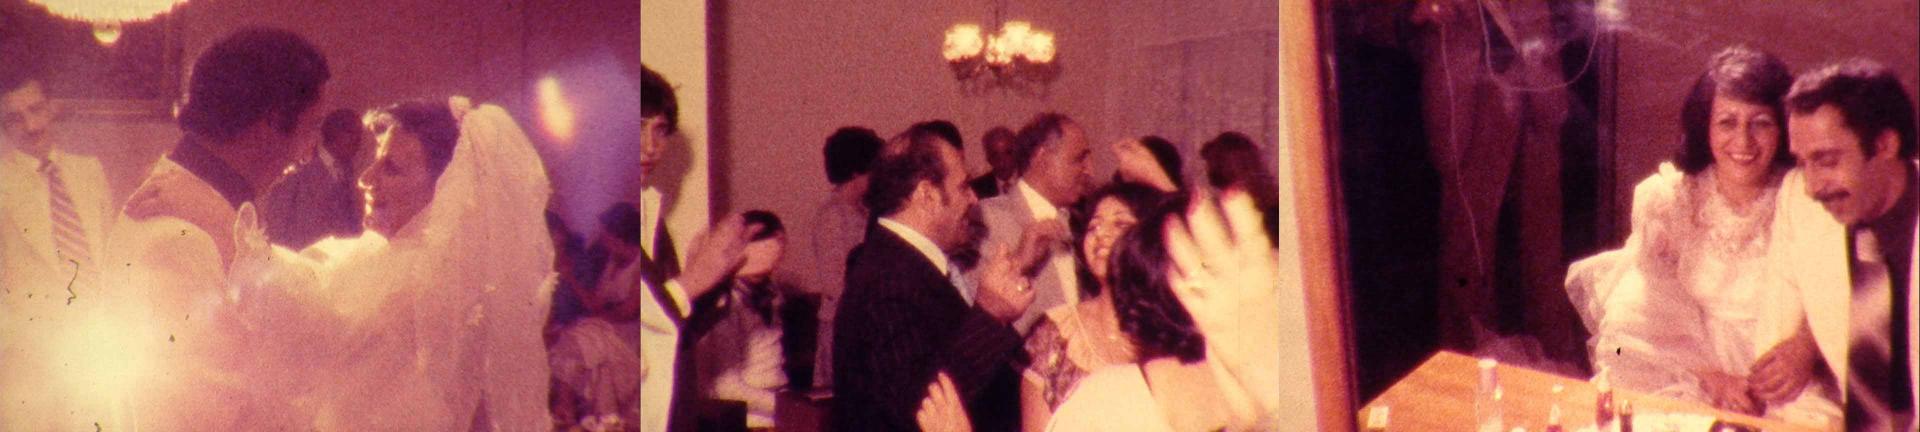 	Film stills: dancing bridal couple, wedding guests at the party, happy bridal couple at the table